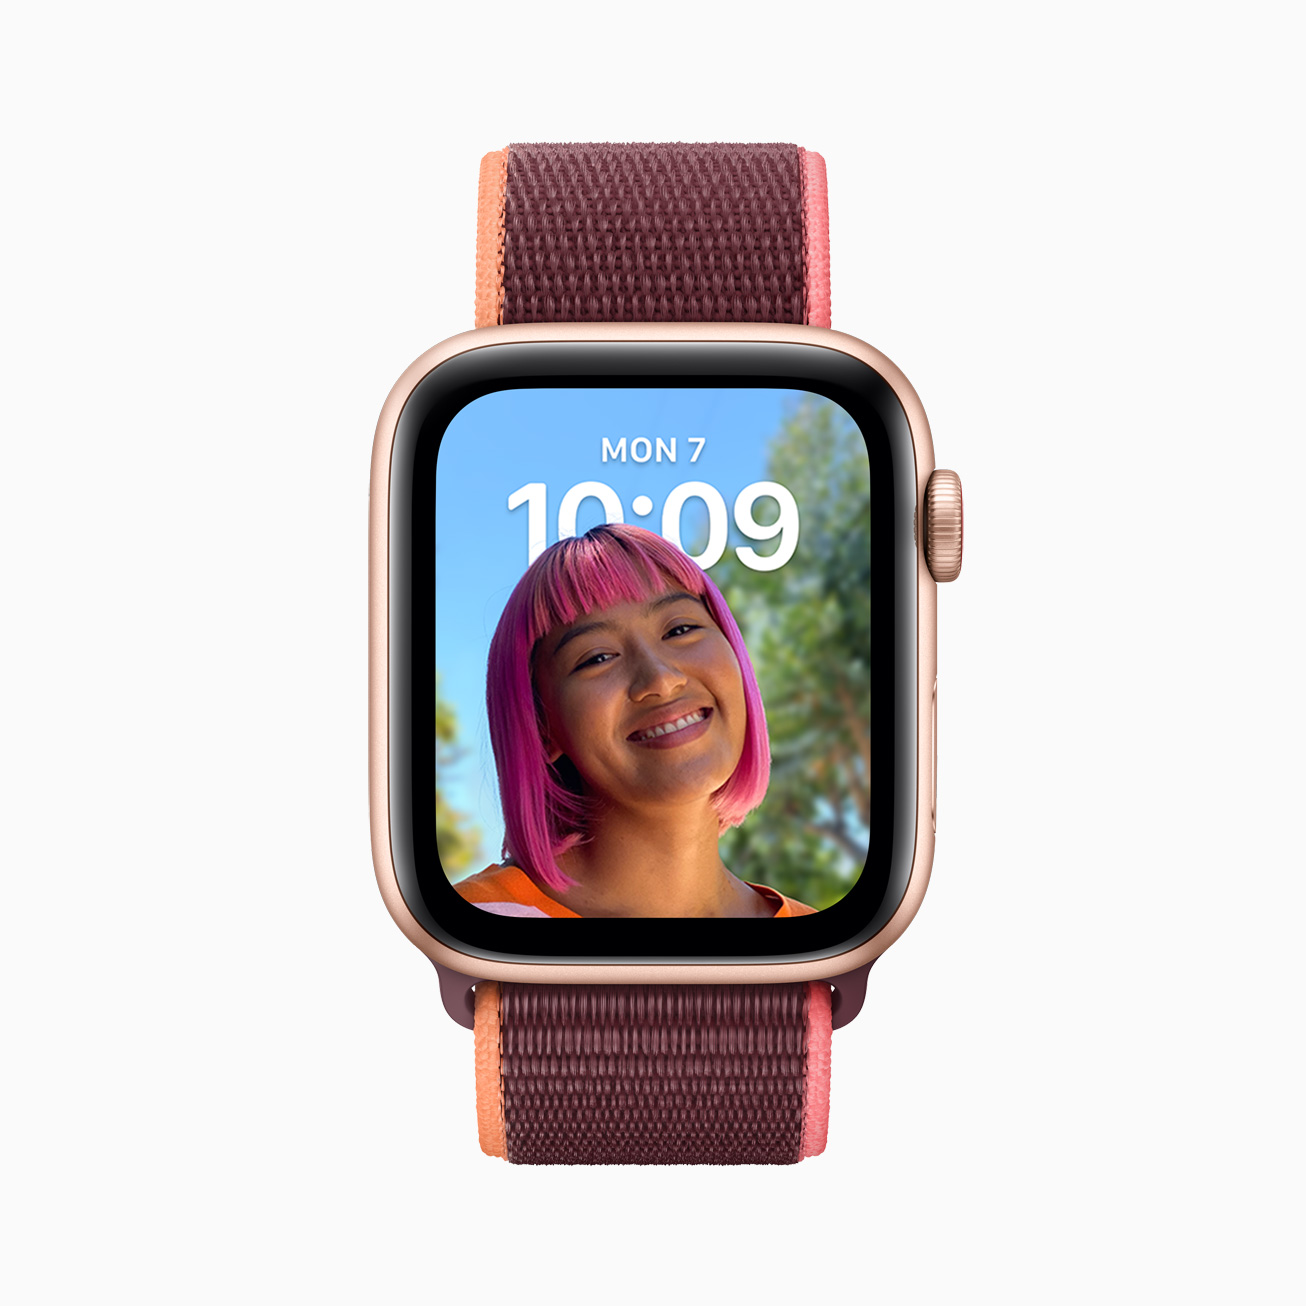 Example Portraits Watch Face on the Apple Watch running watchOS 8